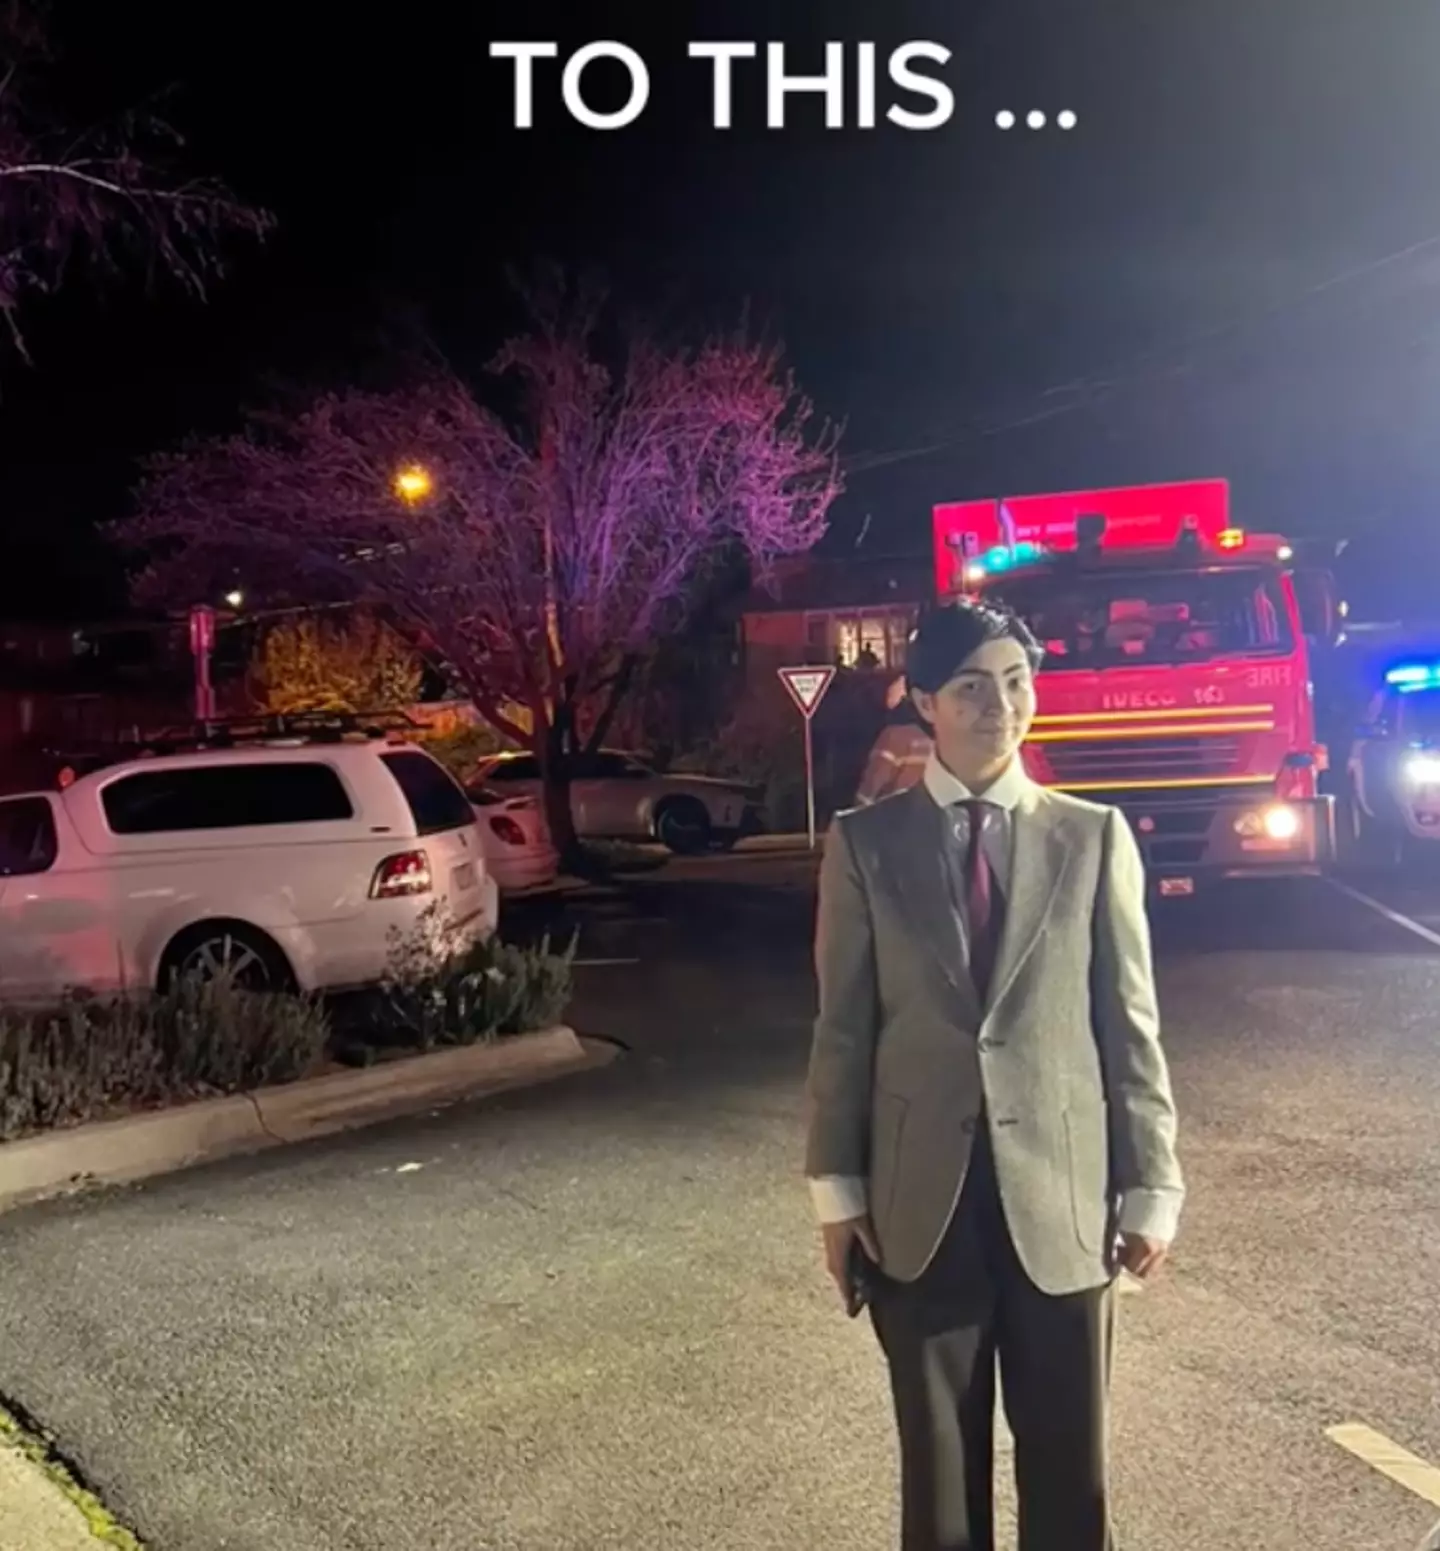 Emergency services were recorded attending the scene of the crash, with the woman dressed as Mr Bean right outside posing with them.